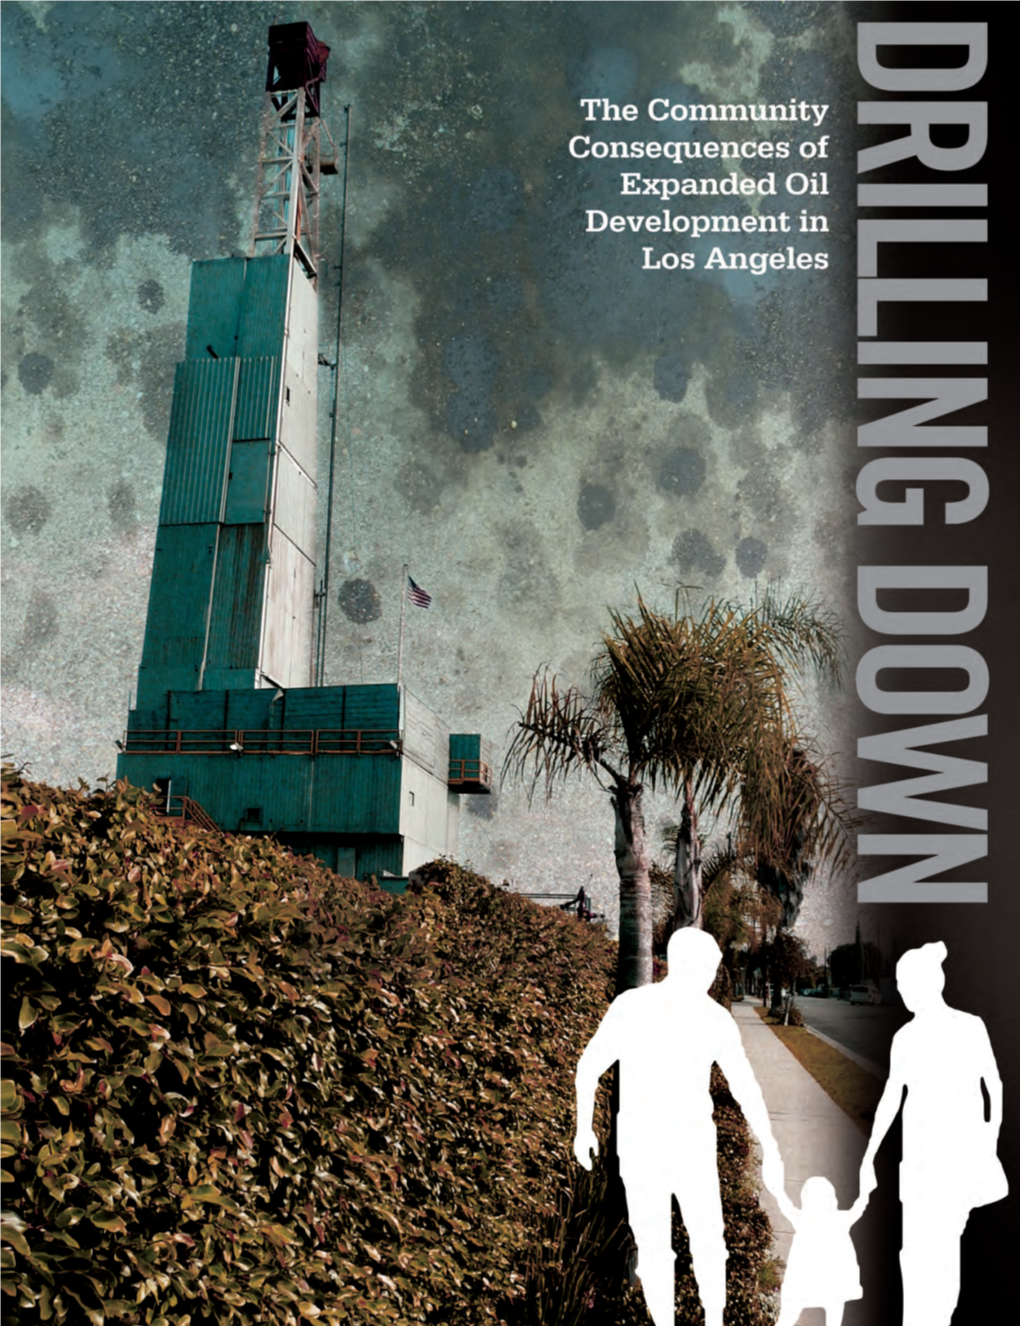 DRILLING DOWN: the Community Consequences of Expanded Oil Development in Los Angeles, Liberty Hill Foundation Aims to Contribute to the Current Policy Debate